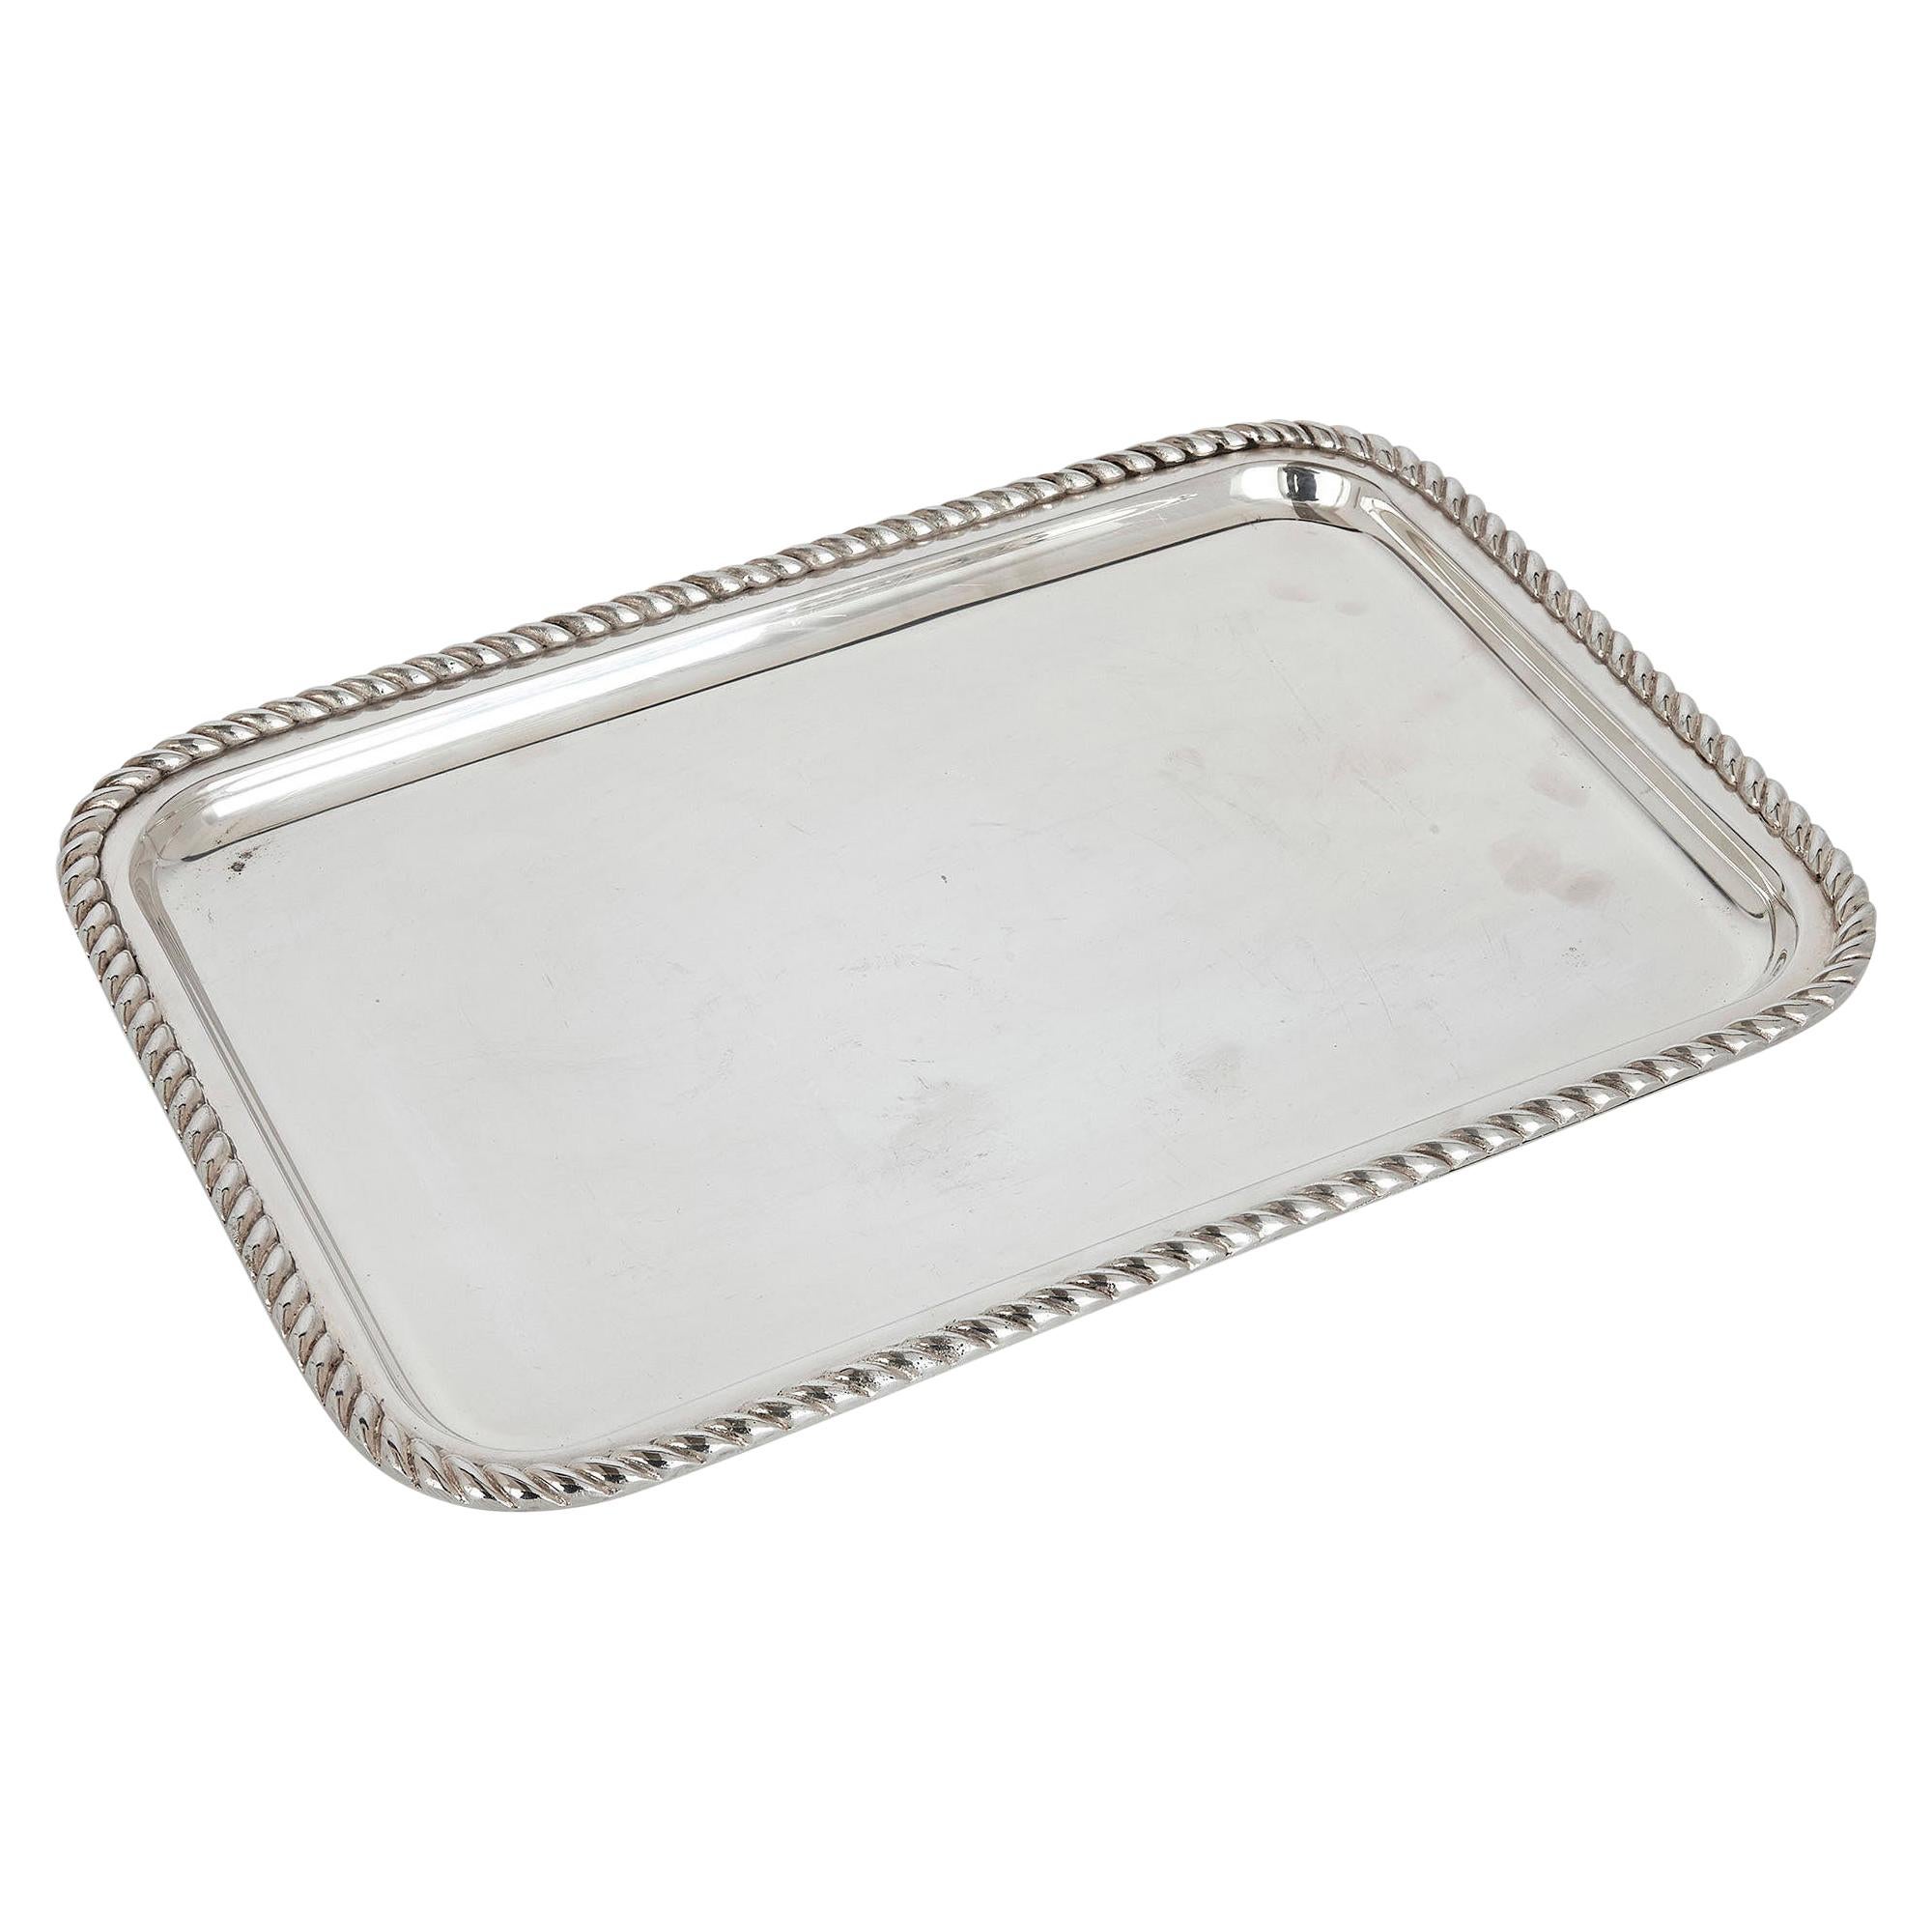 Fine Silver-Plate Tray by Lebanese Firm Habis